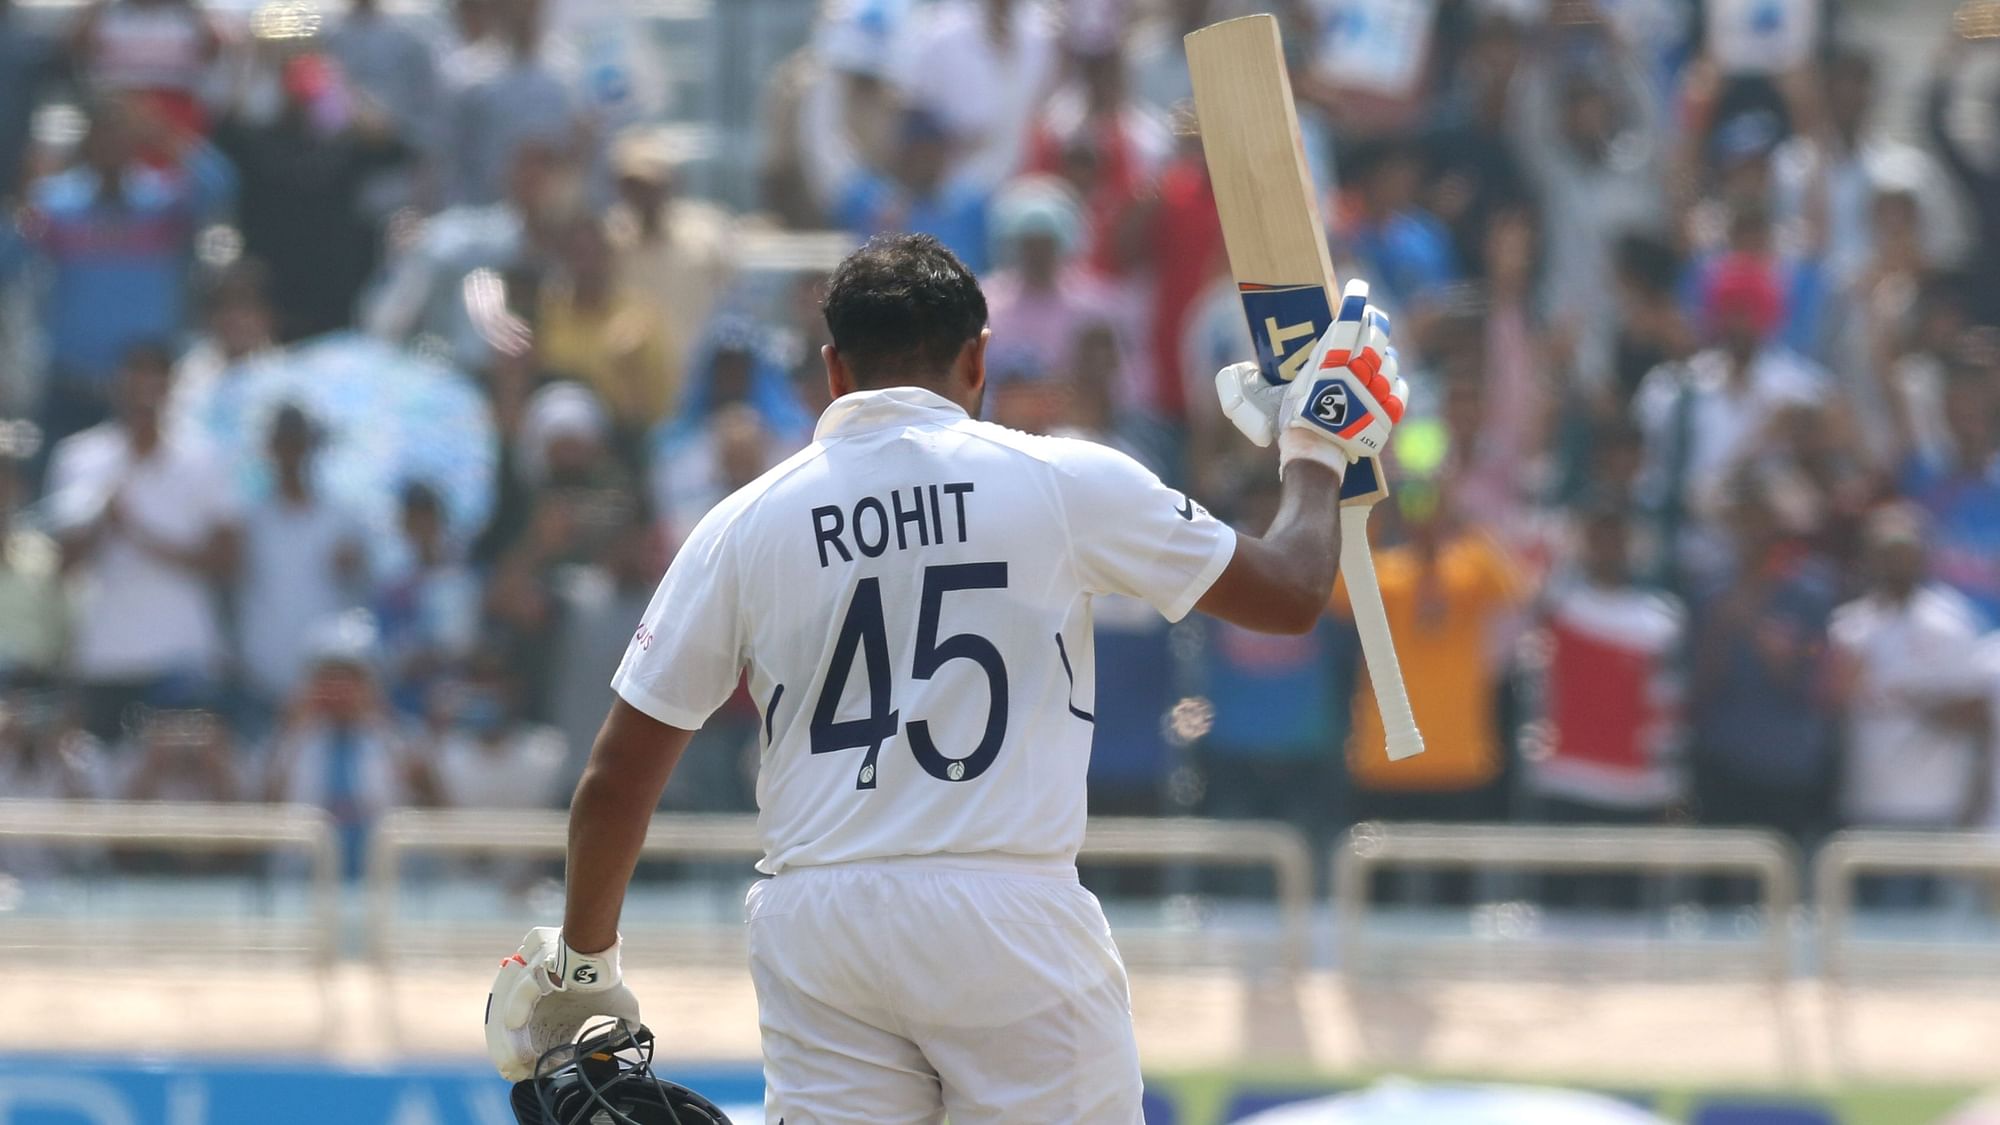 Opening for the first time in Test cricket, Rohit Sharma finished the series as the highest-scorer having scored 529 runs.